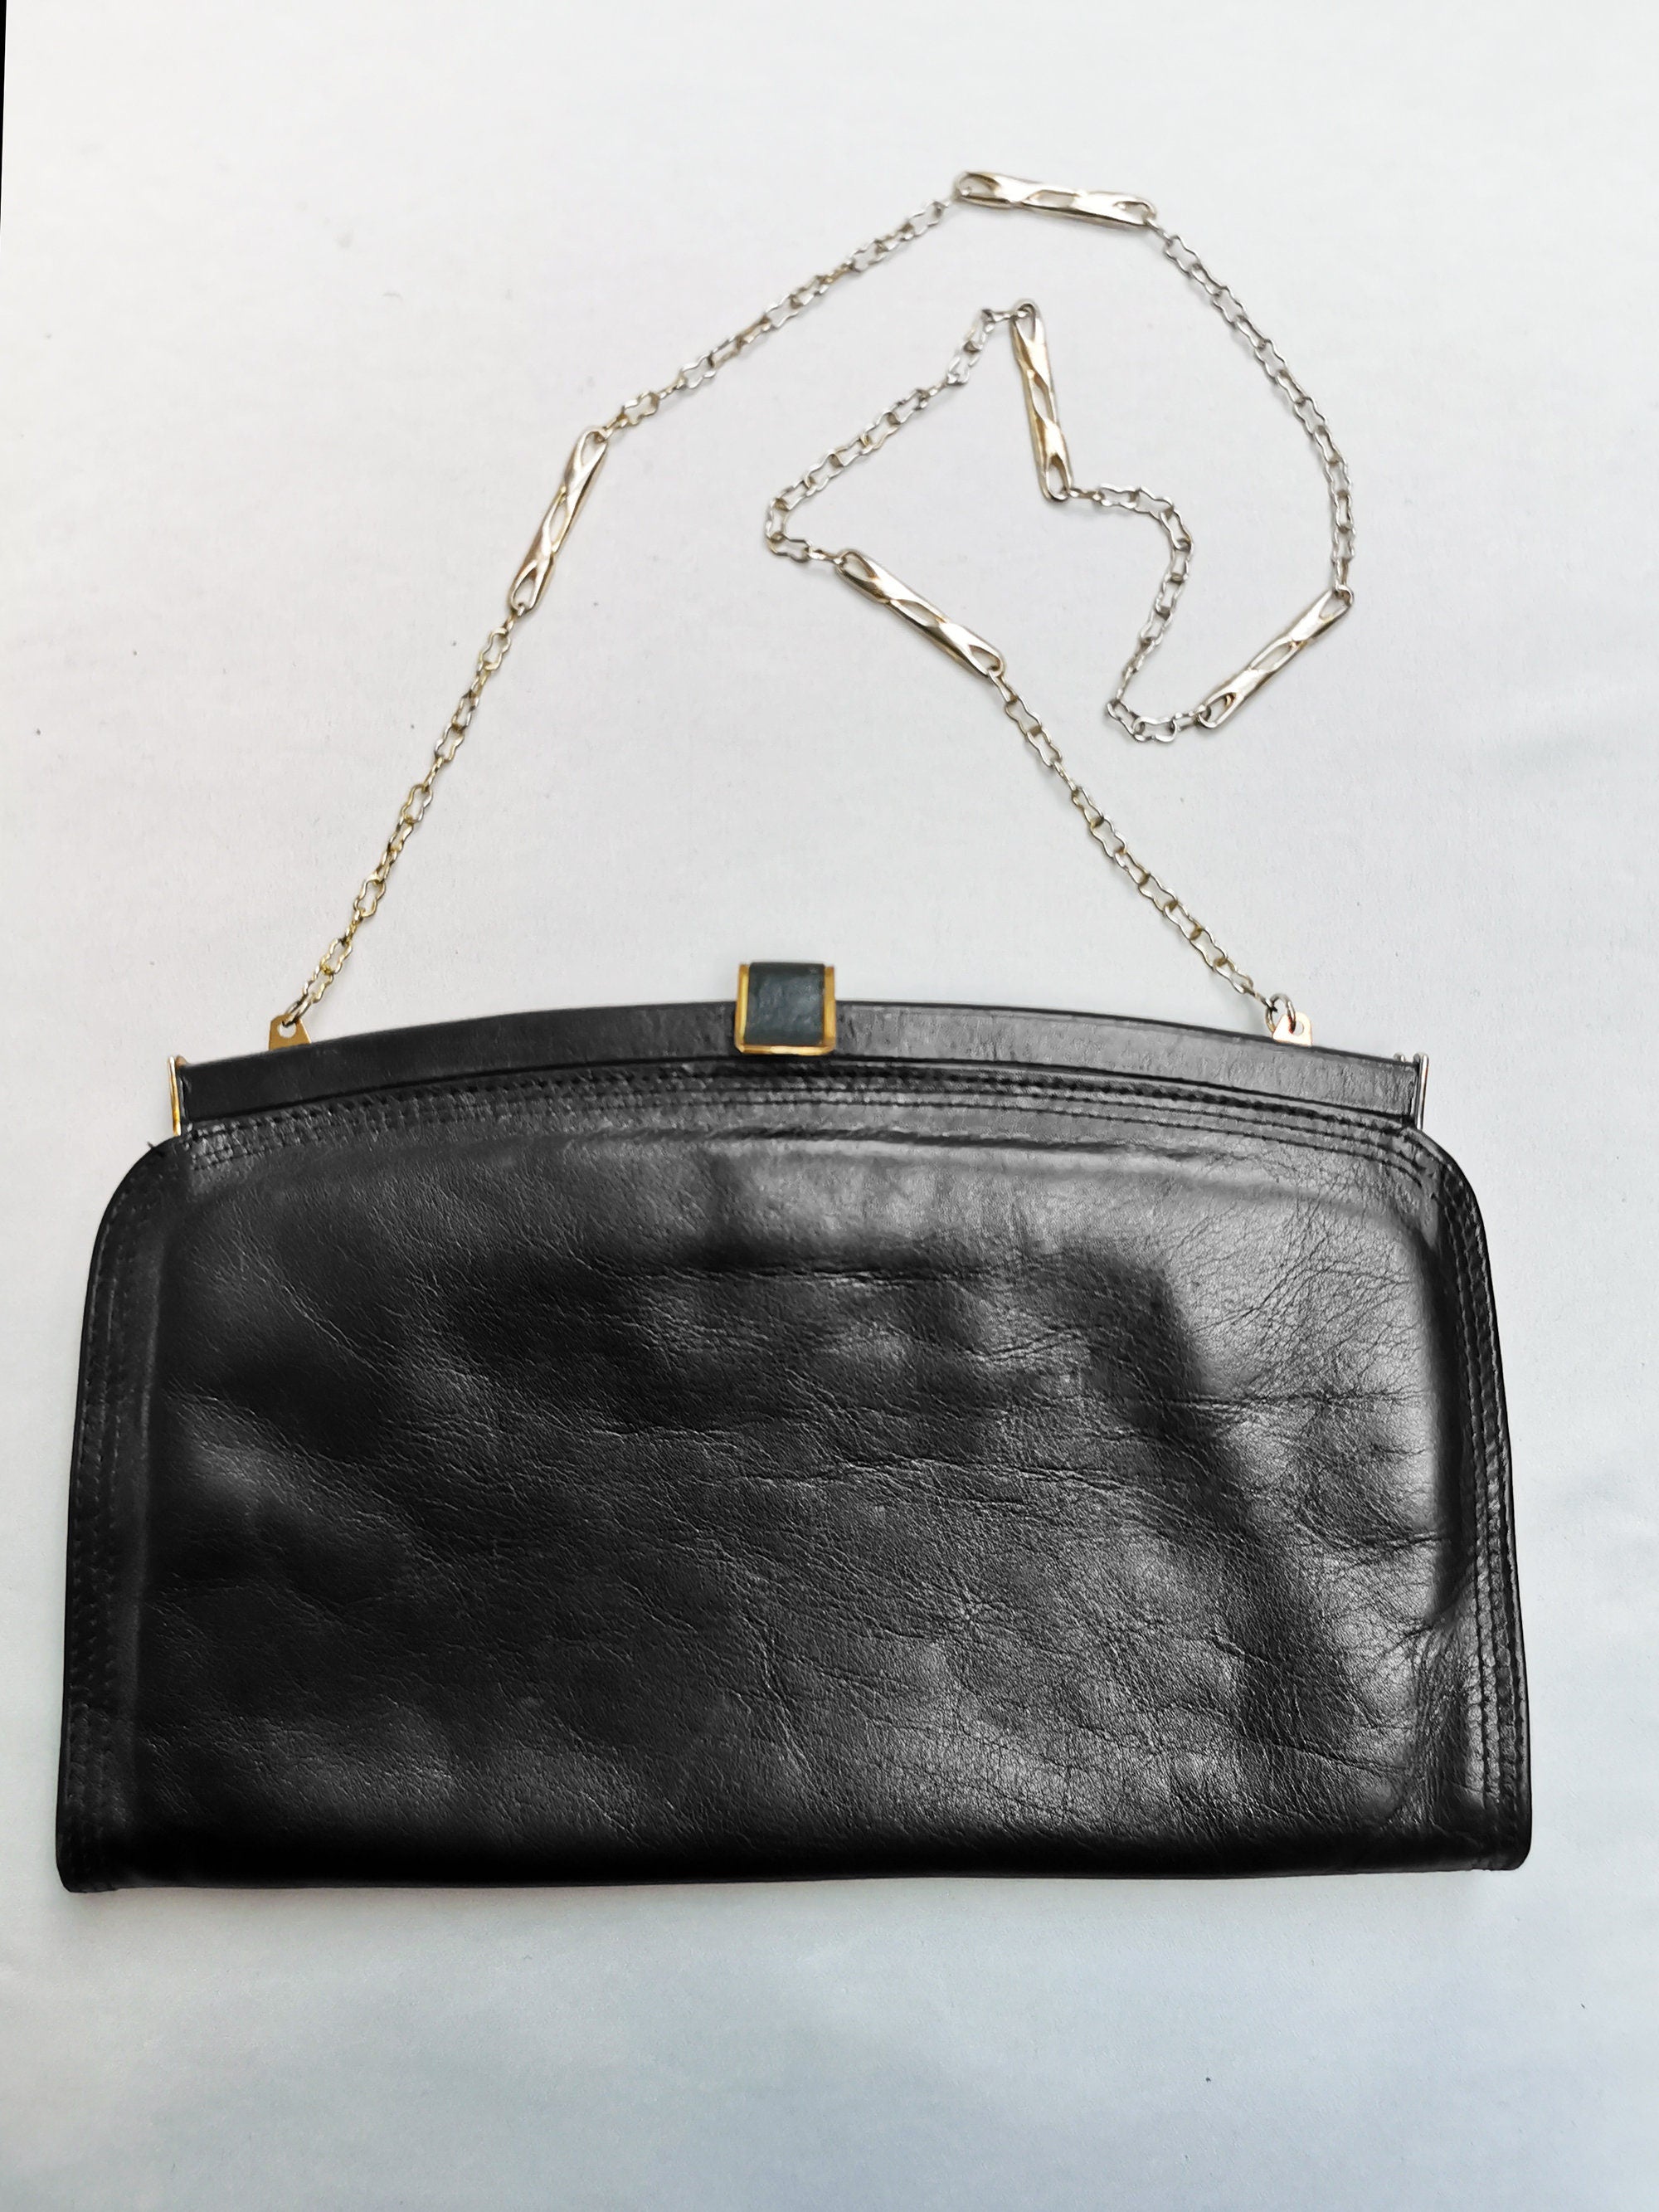 Vintage 80s retro black leather frame bag with chain